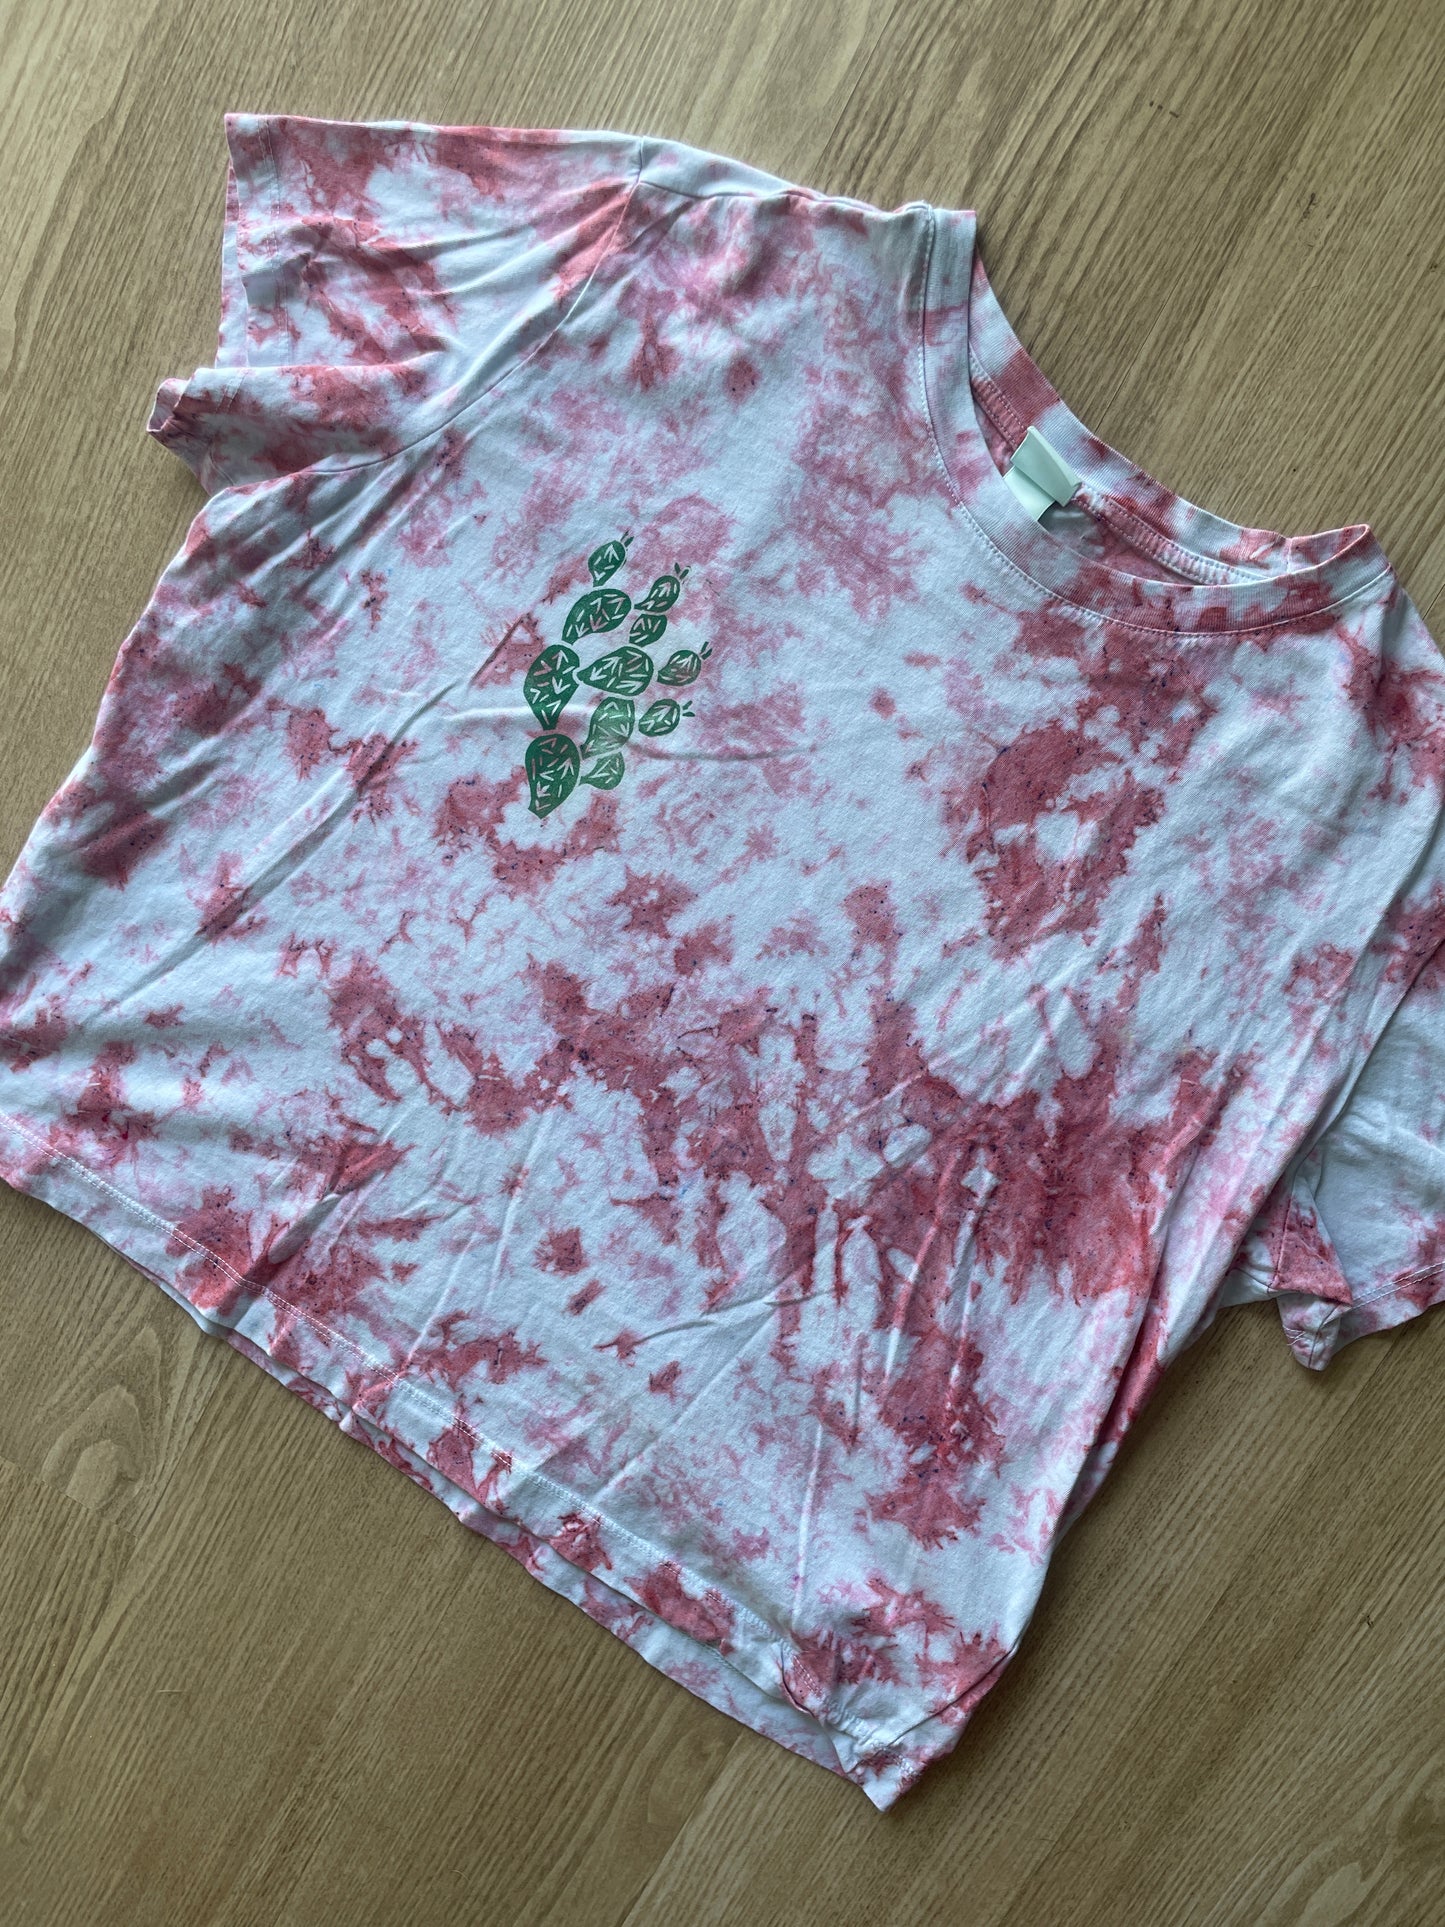 XL Women’s Prickly Pear Cactus Tie Dye T-Shirt | One-Of-a-Kind Pastel Pink and White Crumpled Short Sleeve